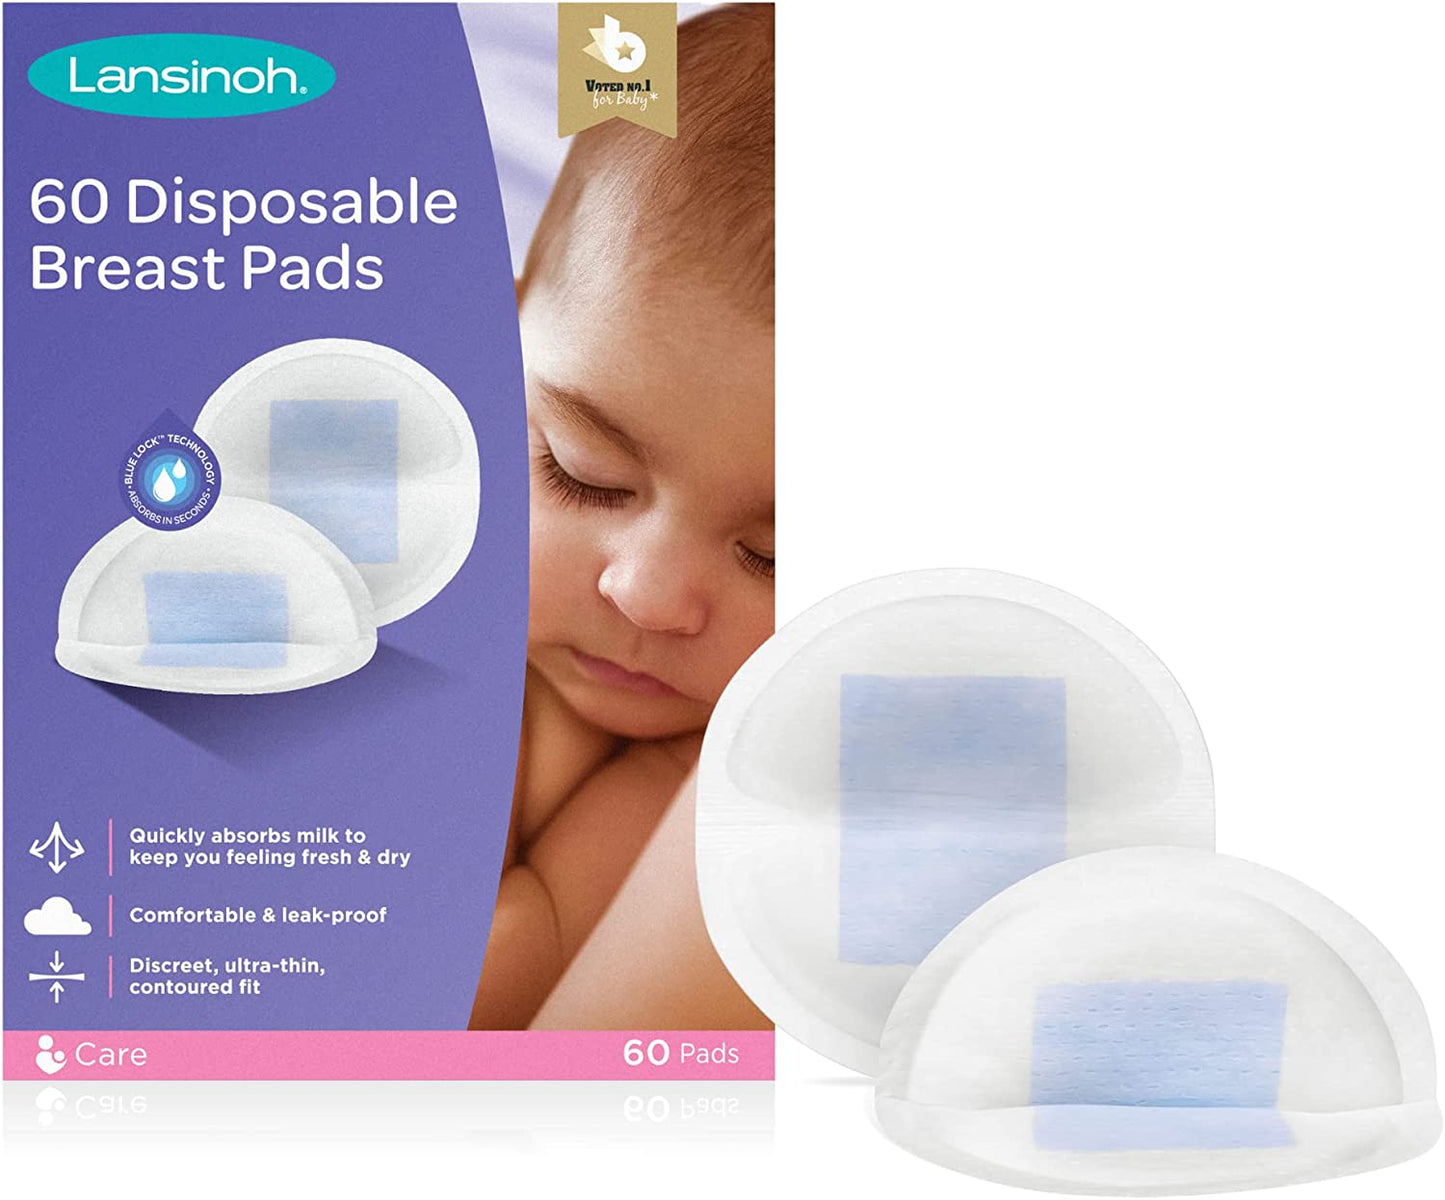 Disposable Breast Pads Pack of 60 for nursing breastfeeding mothers, essential for hospital bag, thin super absorbent layers, discreet fit